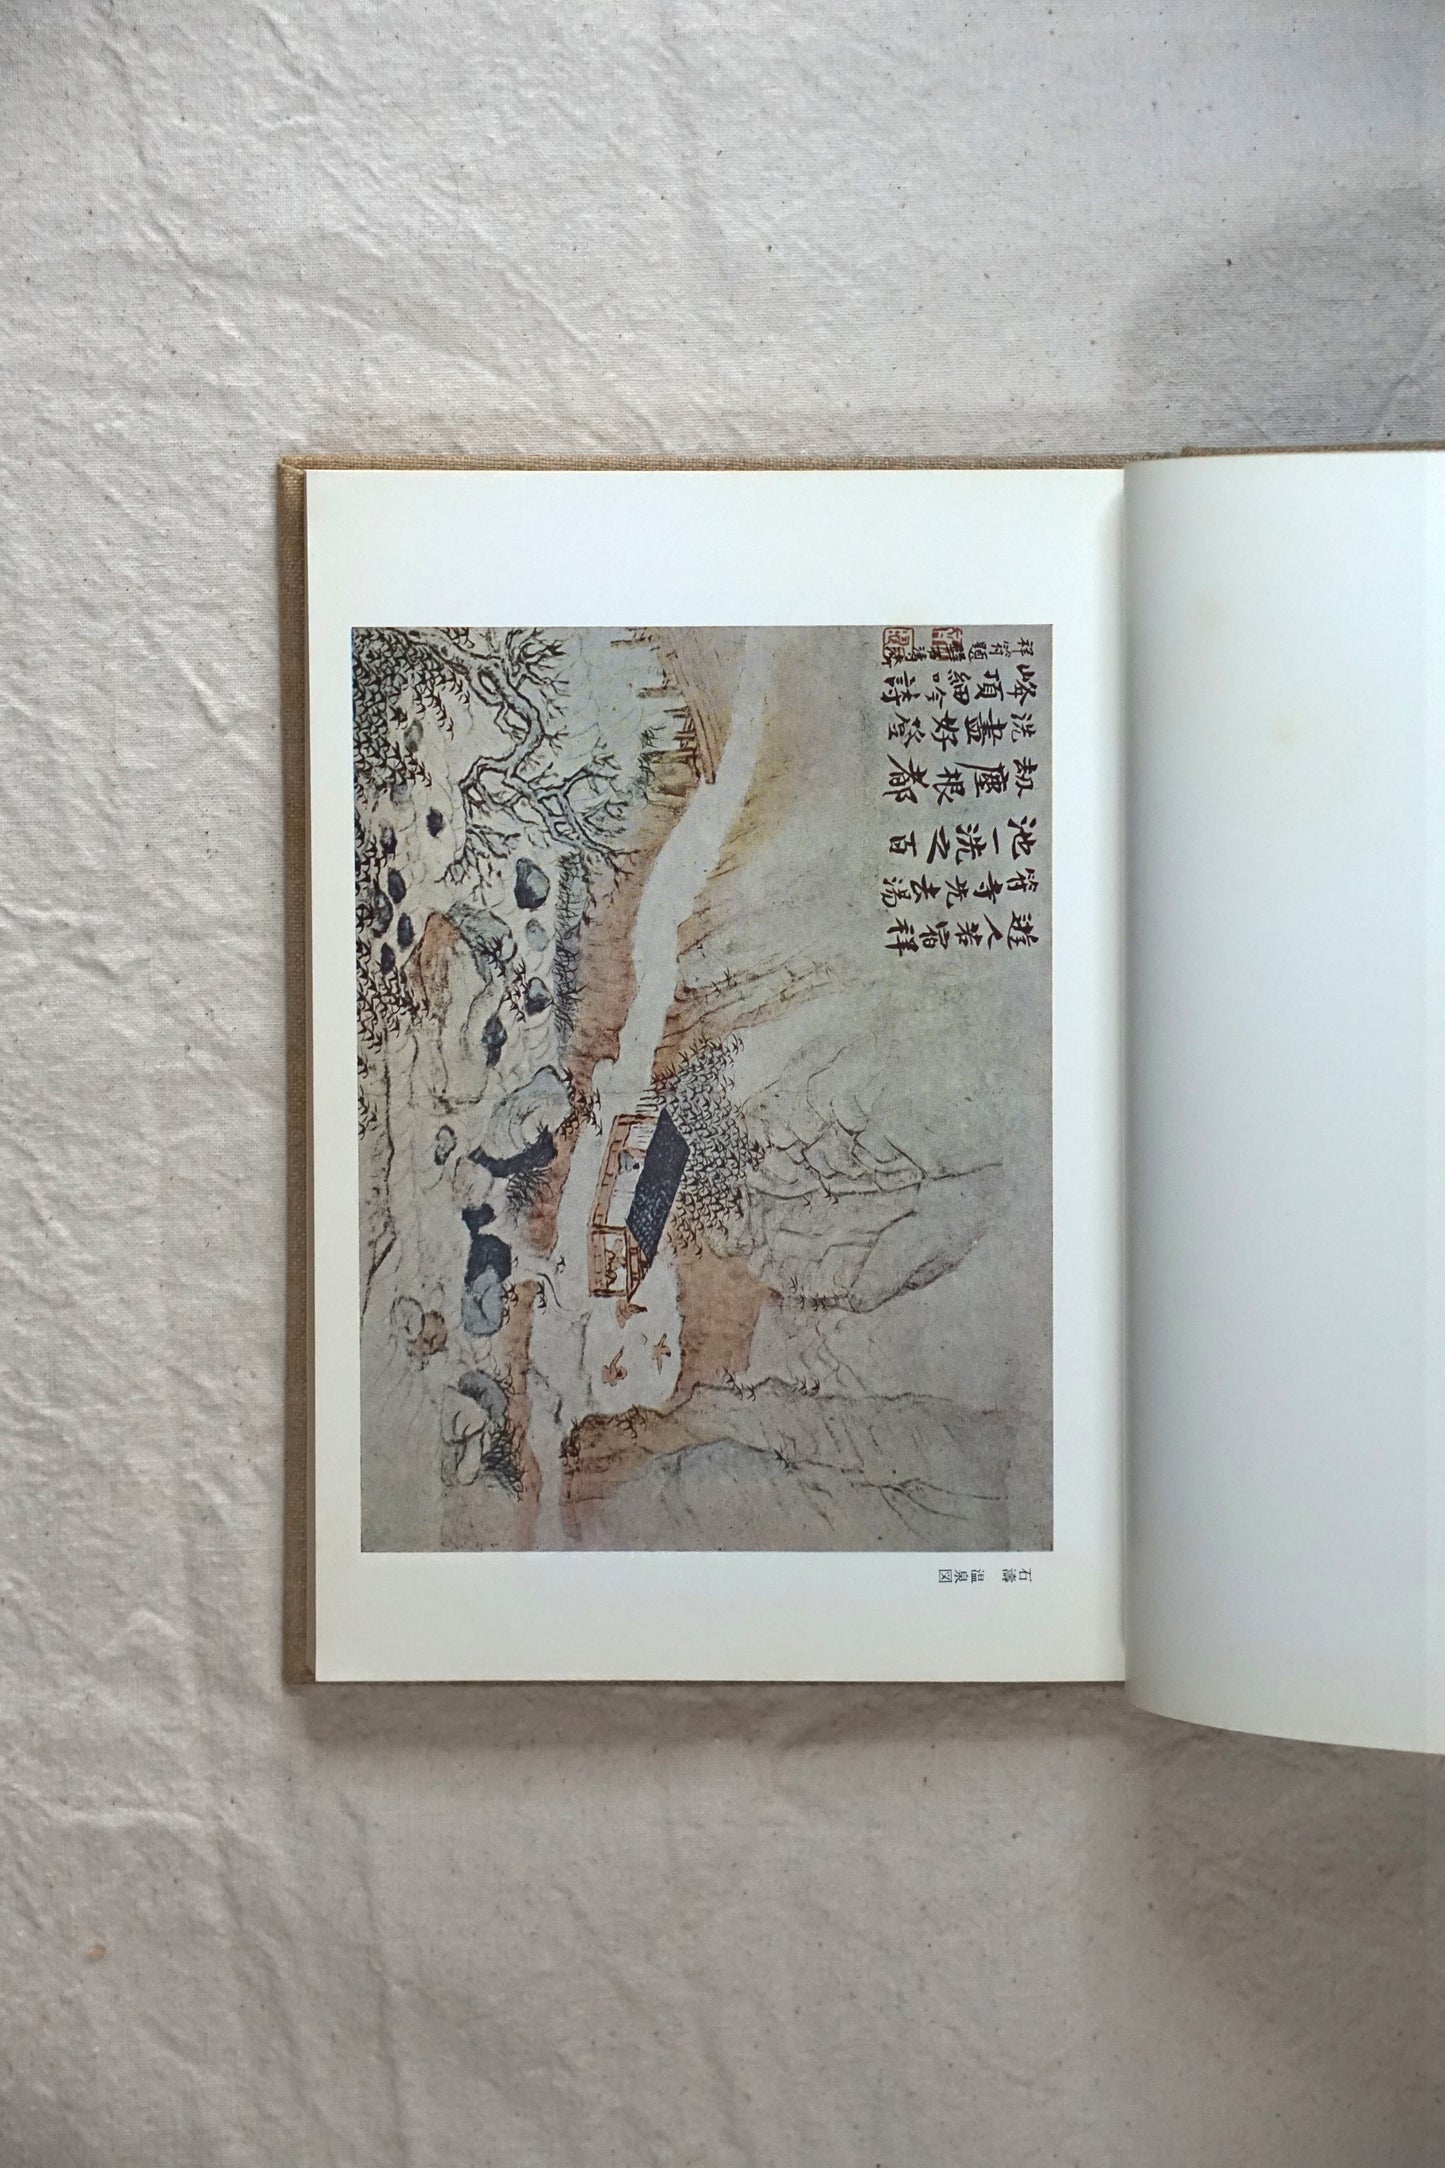 Paintings from the late Ming and early Qing Dynasties *A signed copy addressed to Kodo Fukami